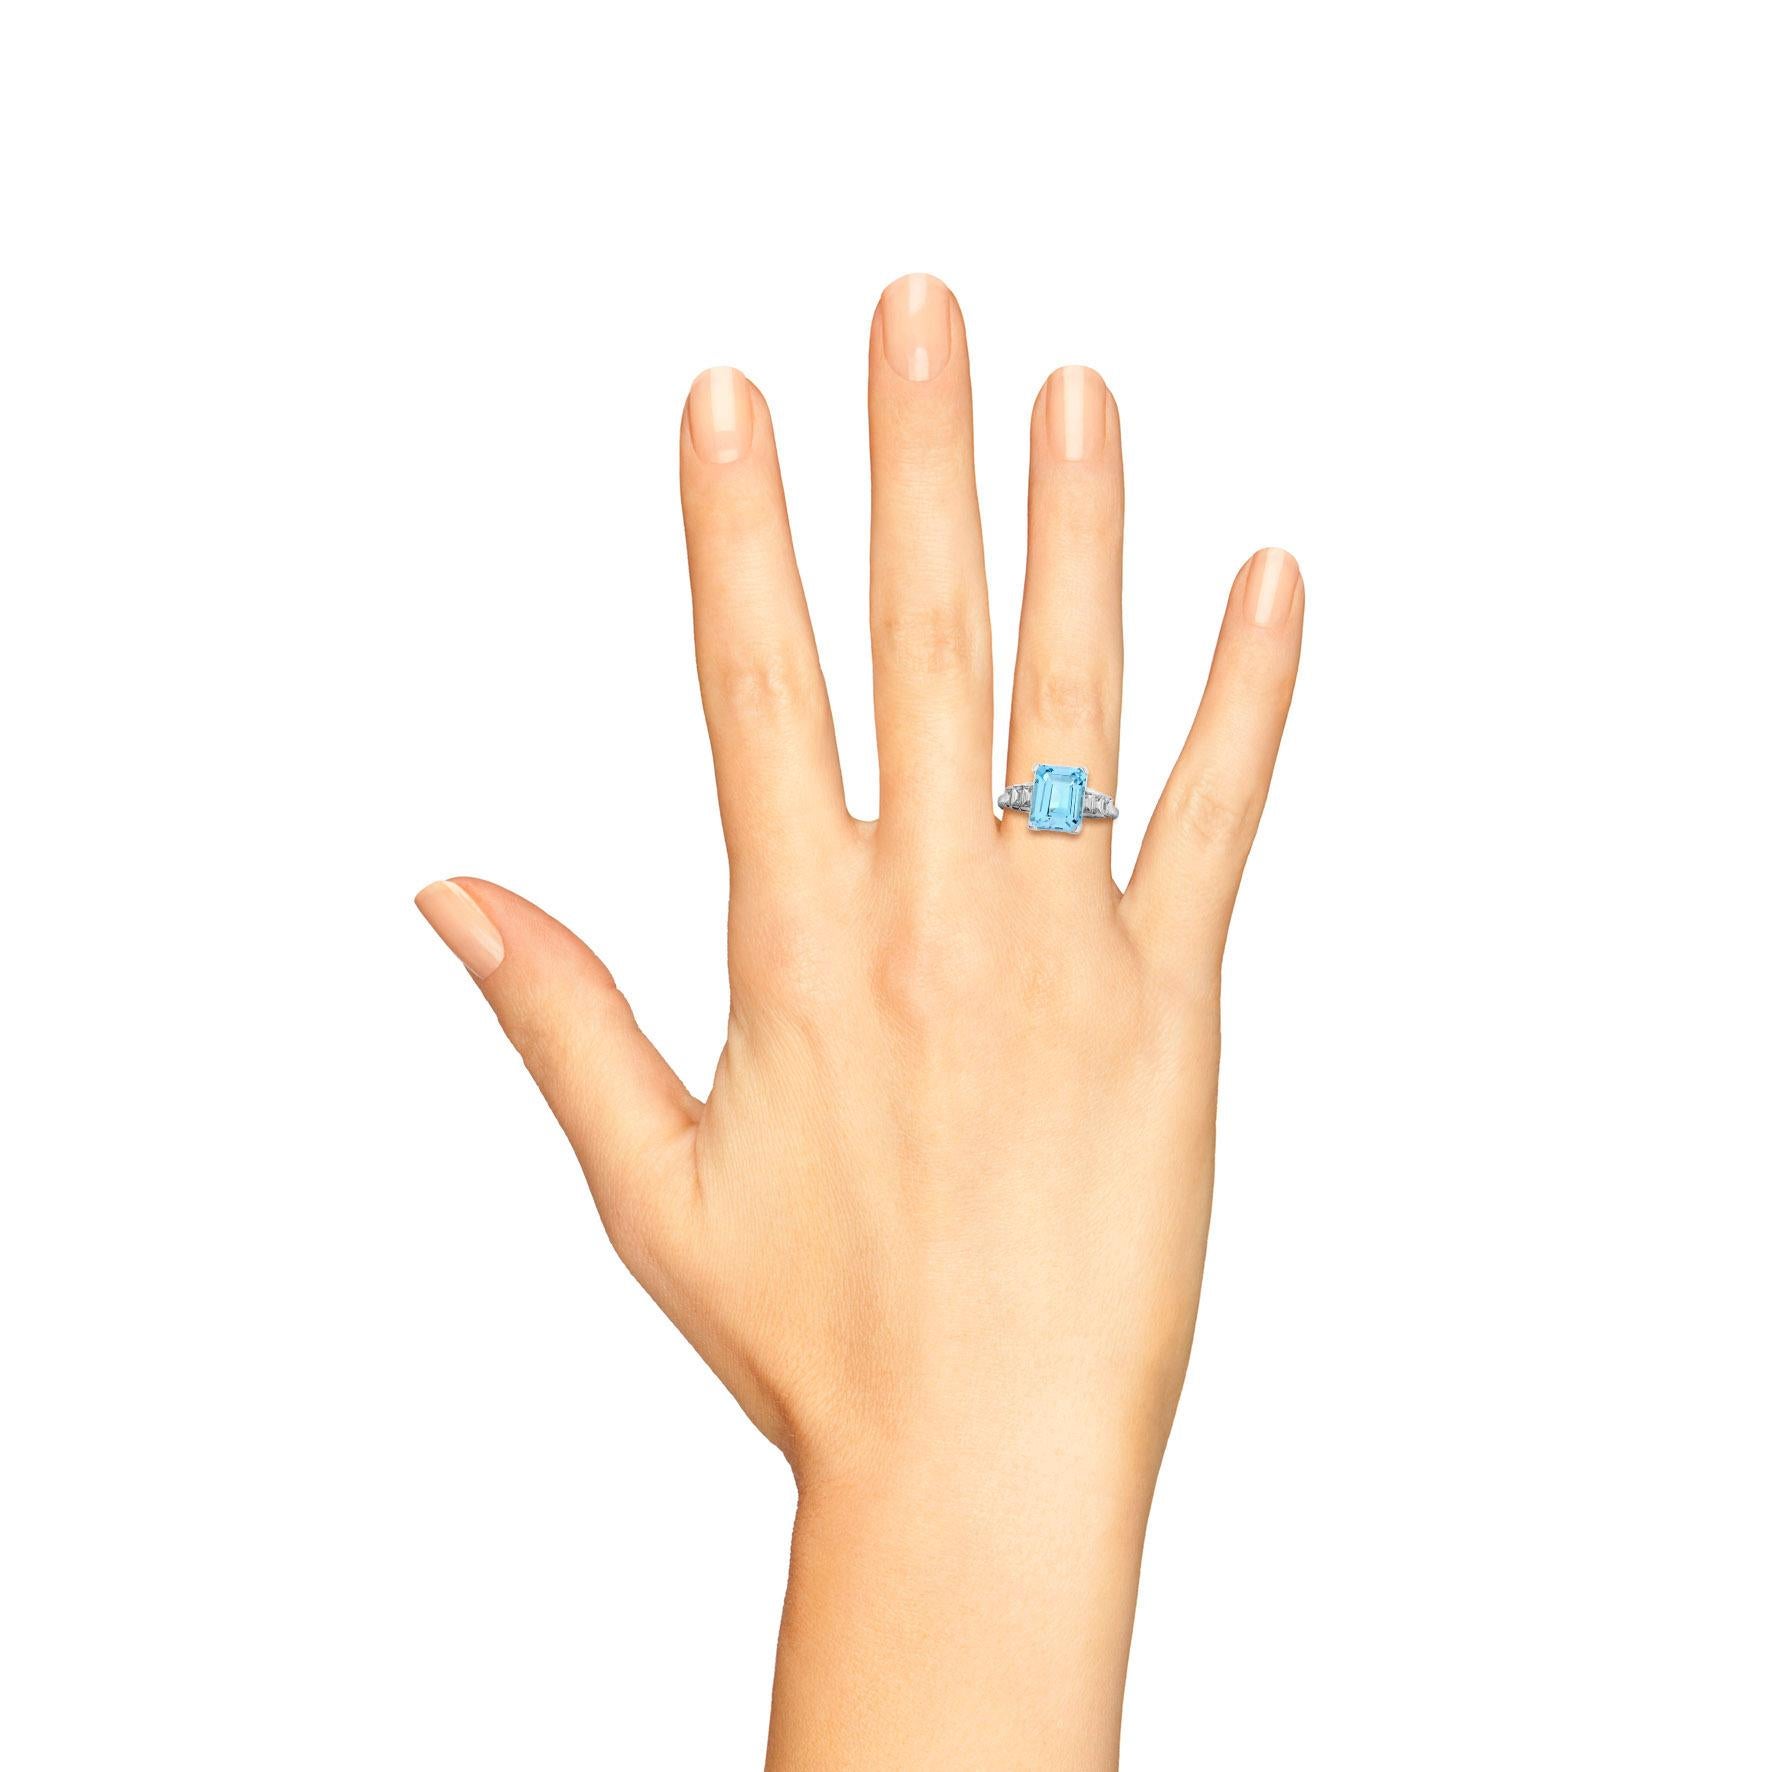 The charming of authentic aquamarine looks lively when paired with the soft 18k white gold of the ring, and the baguette diamonds total 0.37 carats. Feel like a star as you wear this ring, with a glittering aquamarine stone and six sparkling